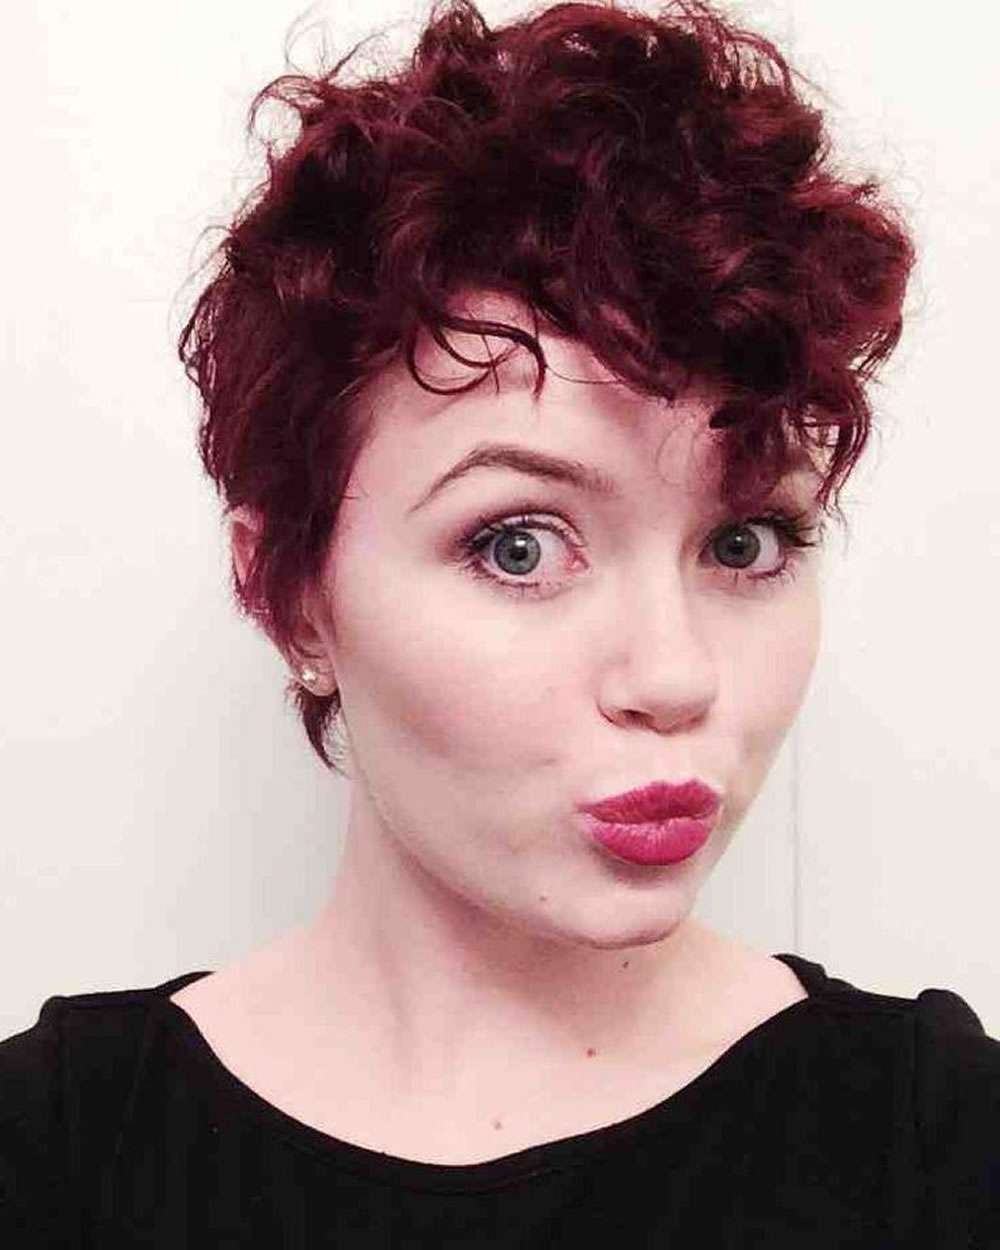 pixie cut 2018 beautiful curly pixie haircuts for 2018 amp pixie short hairstyle of pixie cut 2018 | Stay at Home Mum.com.au